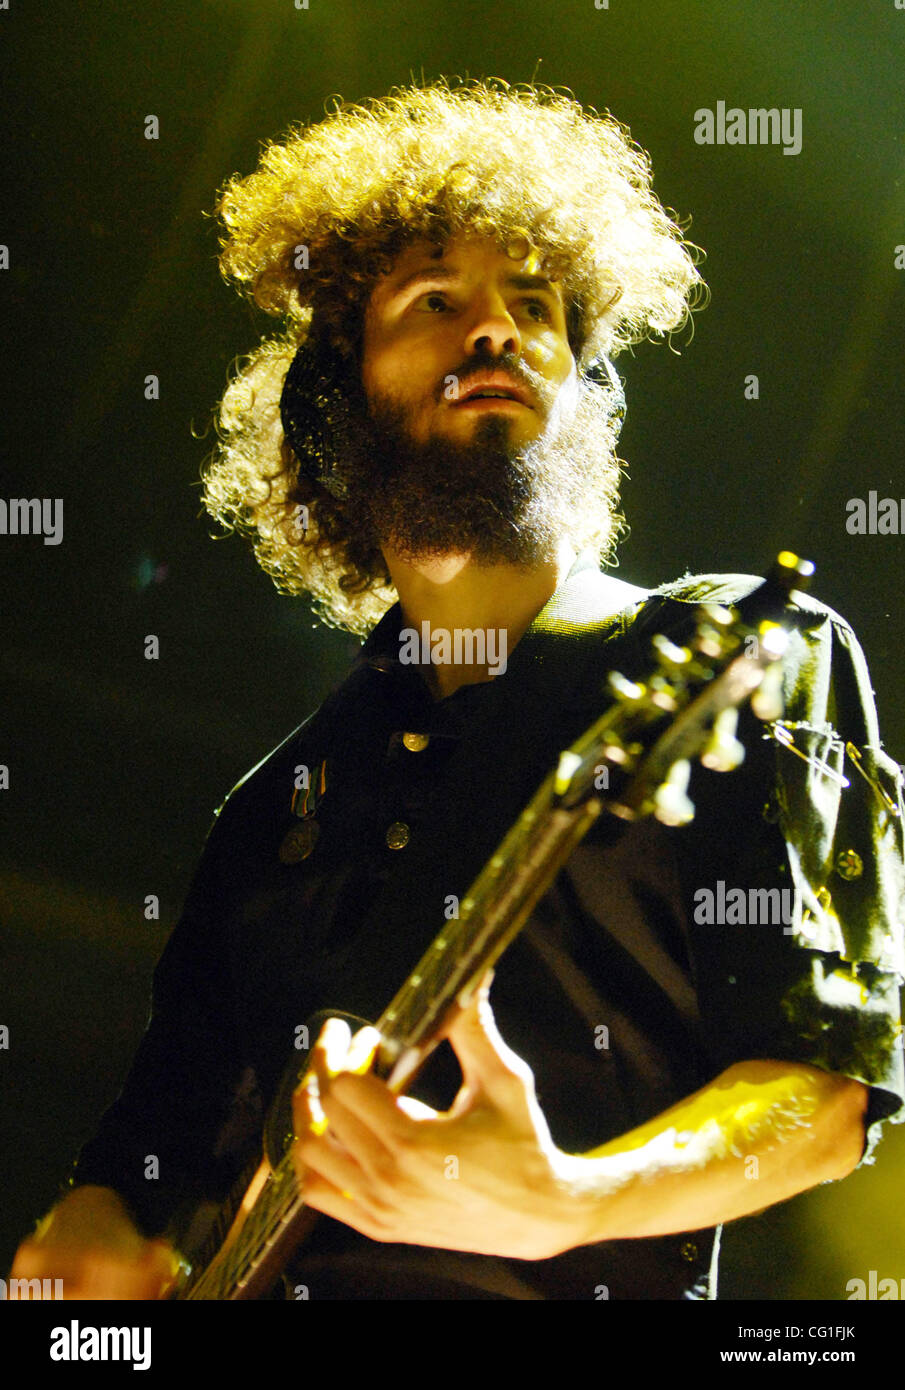 Aug. 13, 2007  Raleigh, NC; USA, Guitarist BRAD DELSON of the band Linkin Park performs live as the 2007 Projekt Revolution Tour makes a stop at Walnut Creek Amphitheatre located in Raleigh.  Copyright 2007 Jason Moore. Mandatory Credit: Jason Moore Stock Photo